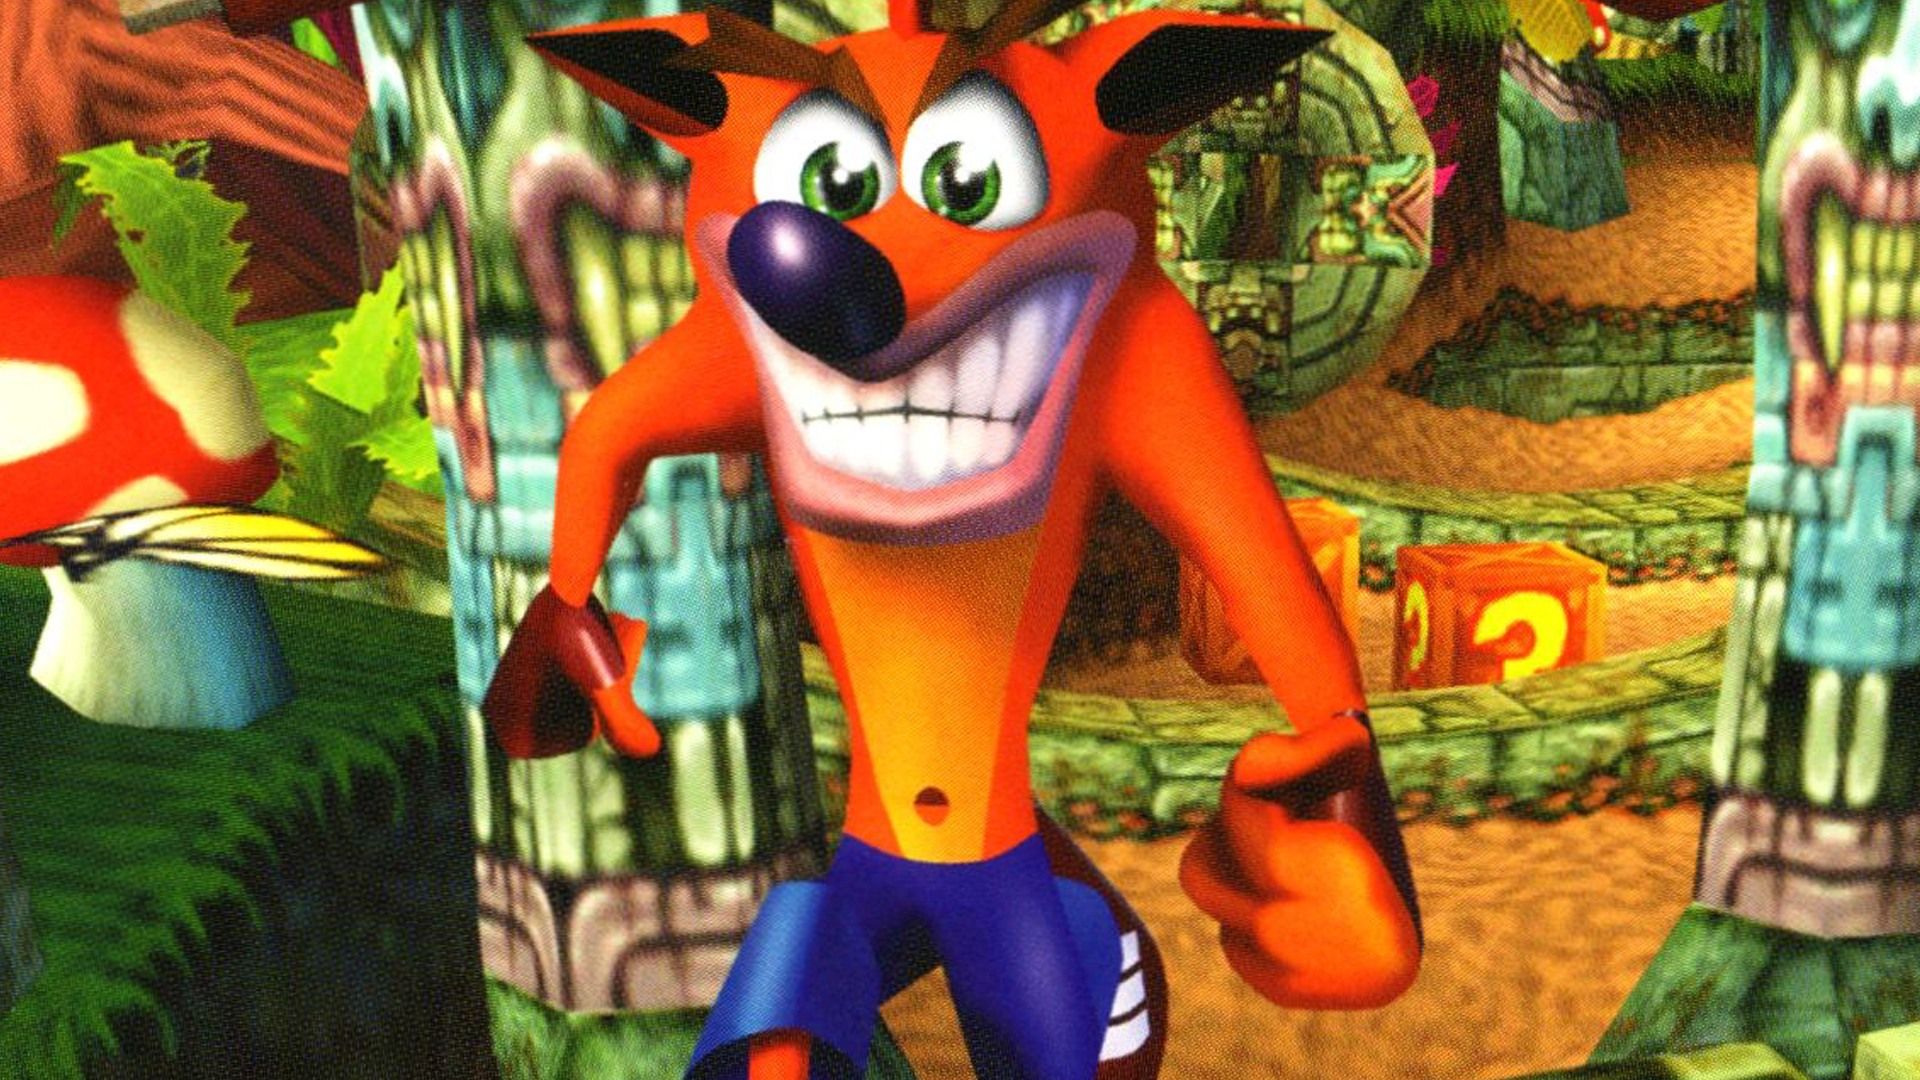 All the Crash Bandicoot games from the original Mind Over Mutant